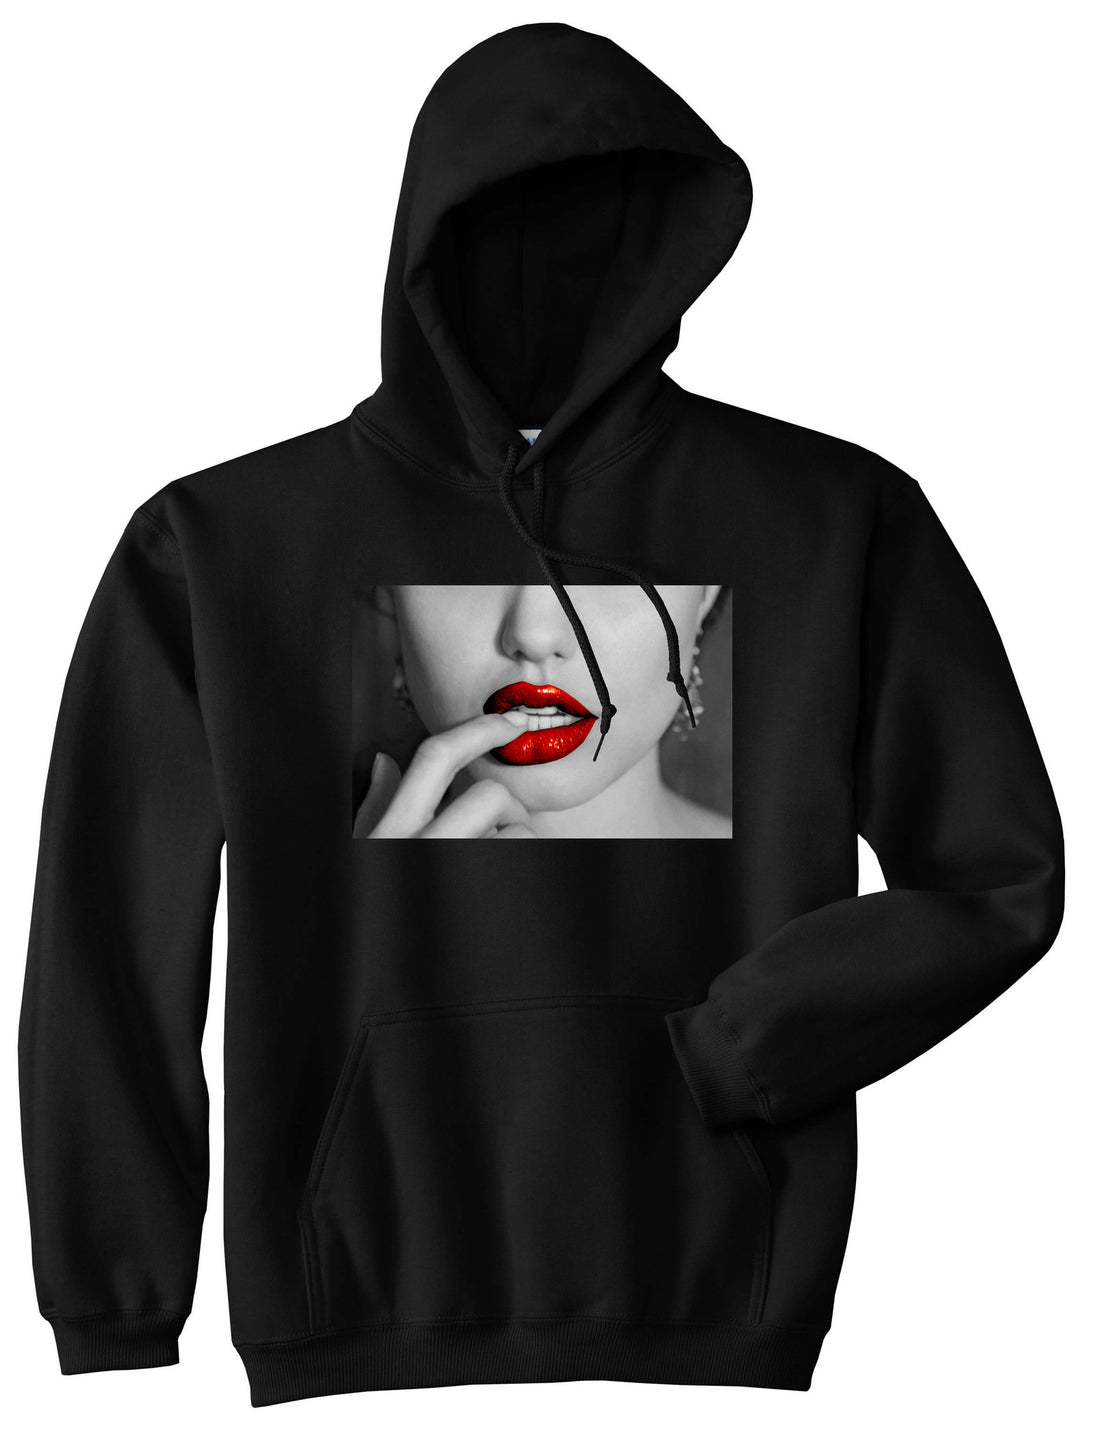  Angelina Red by Kings Of NY Lips Jolie Sexy Hot Picture Pullover Hoodie Hoody In Black by Kings Of NY